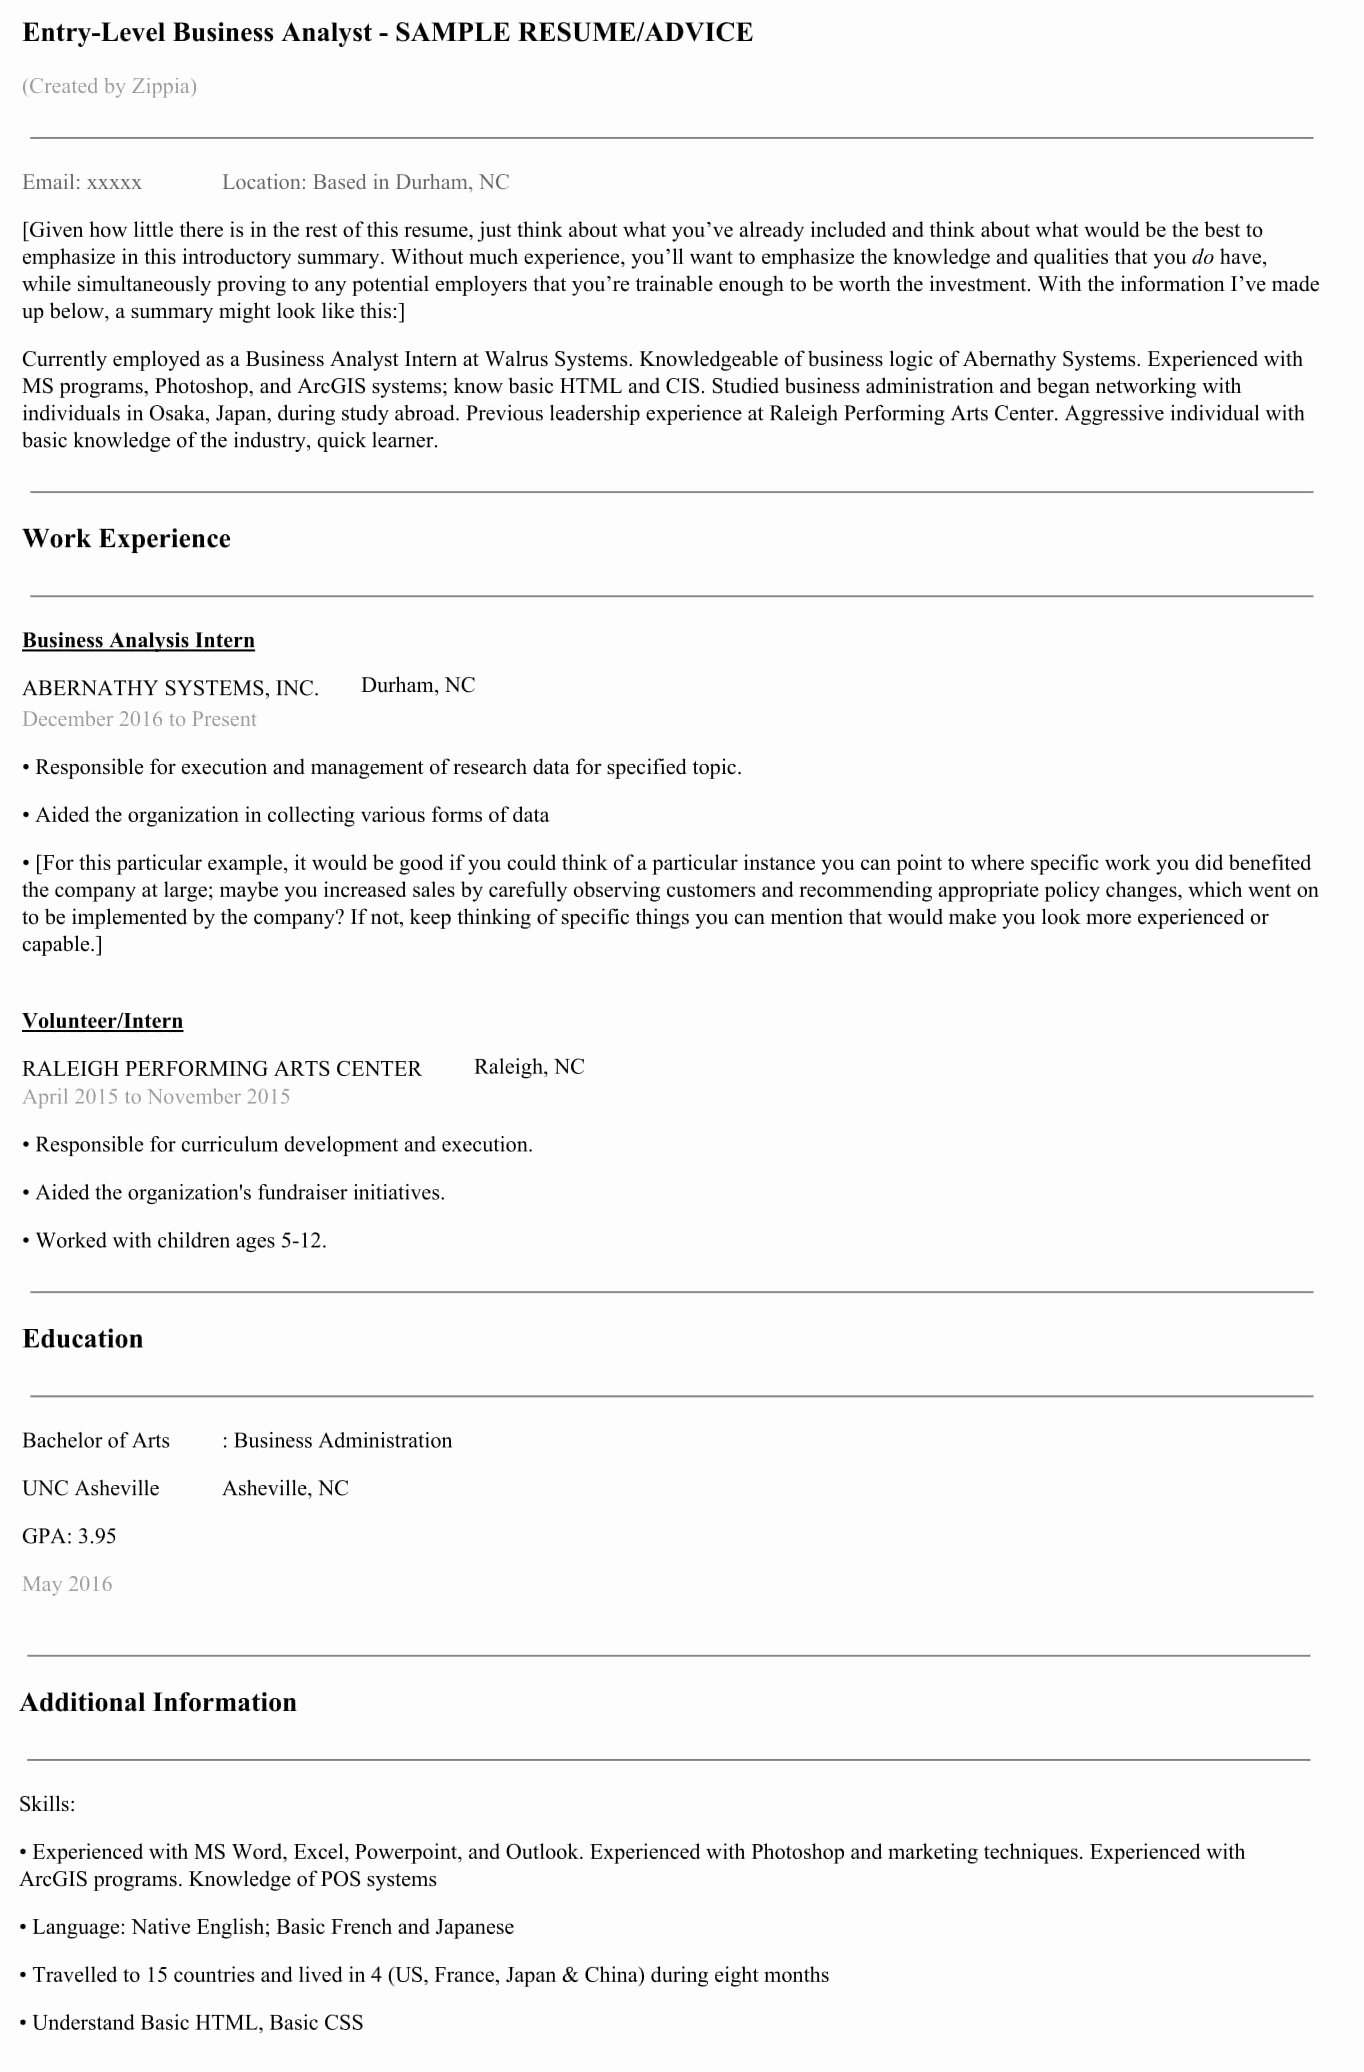 Sample Business Analyst Resume Beautiful How to Write the Perfect Business Analyst Resume Zippia